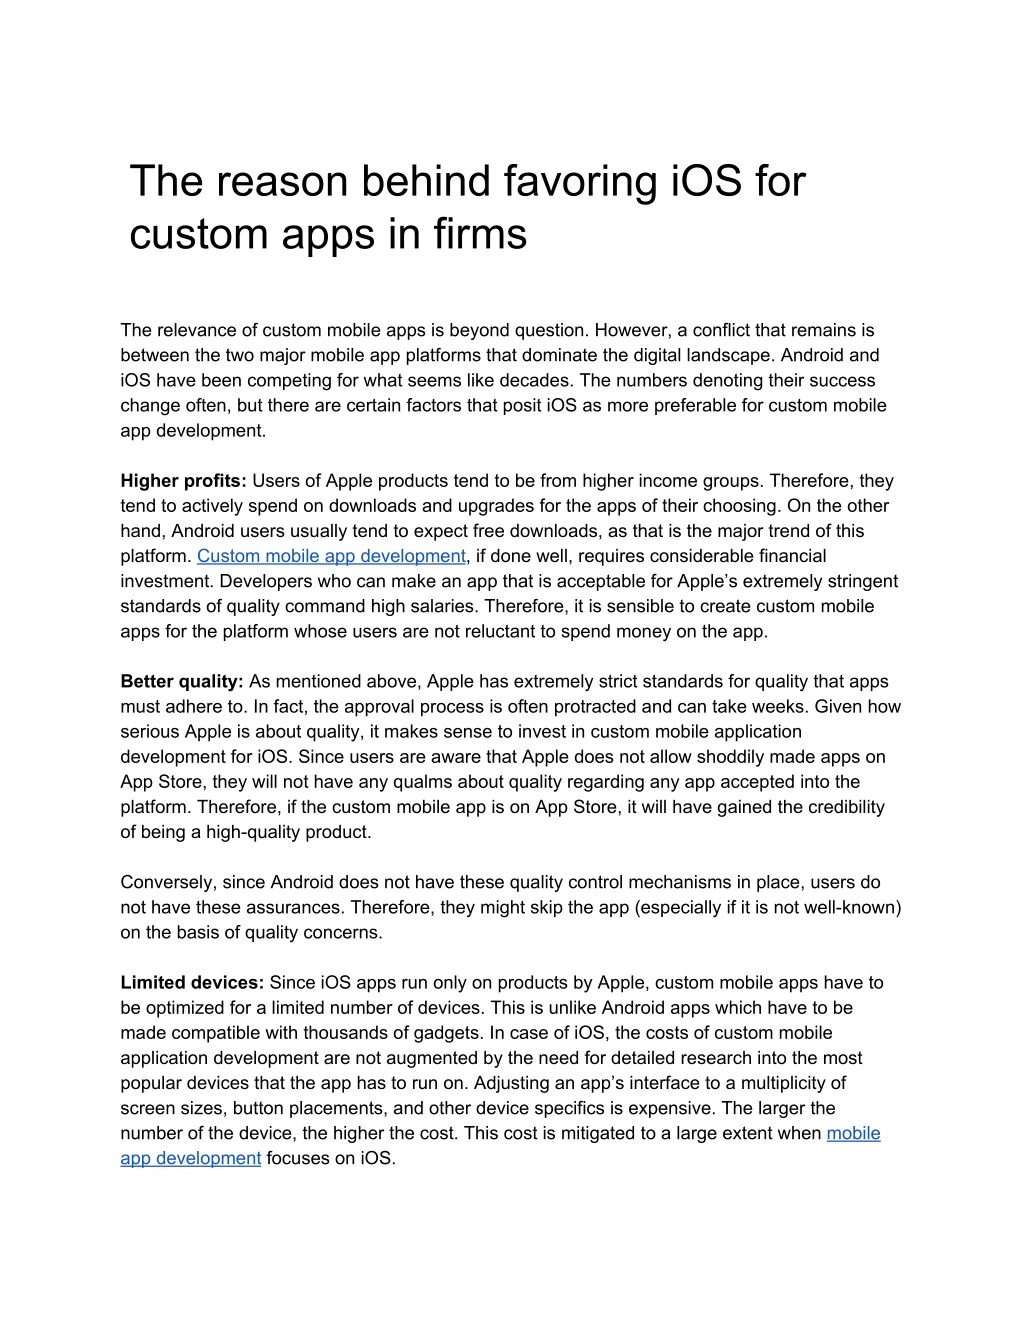 the reason behind favoring ios for custom apps